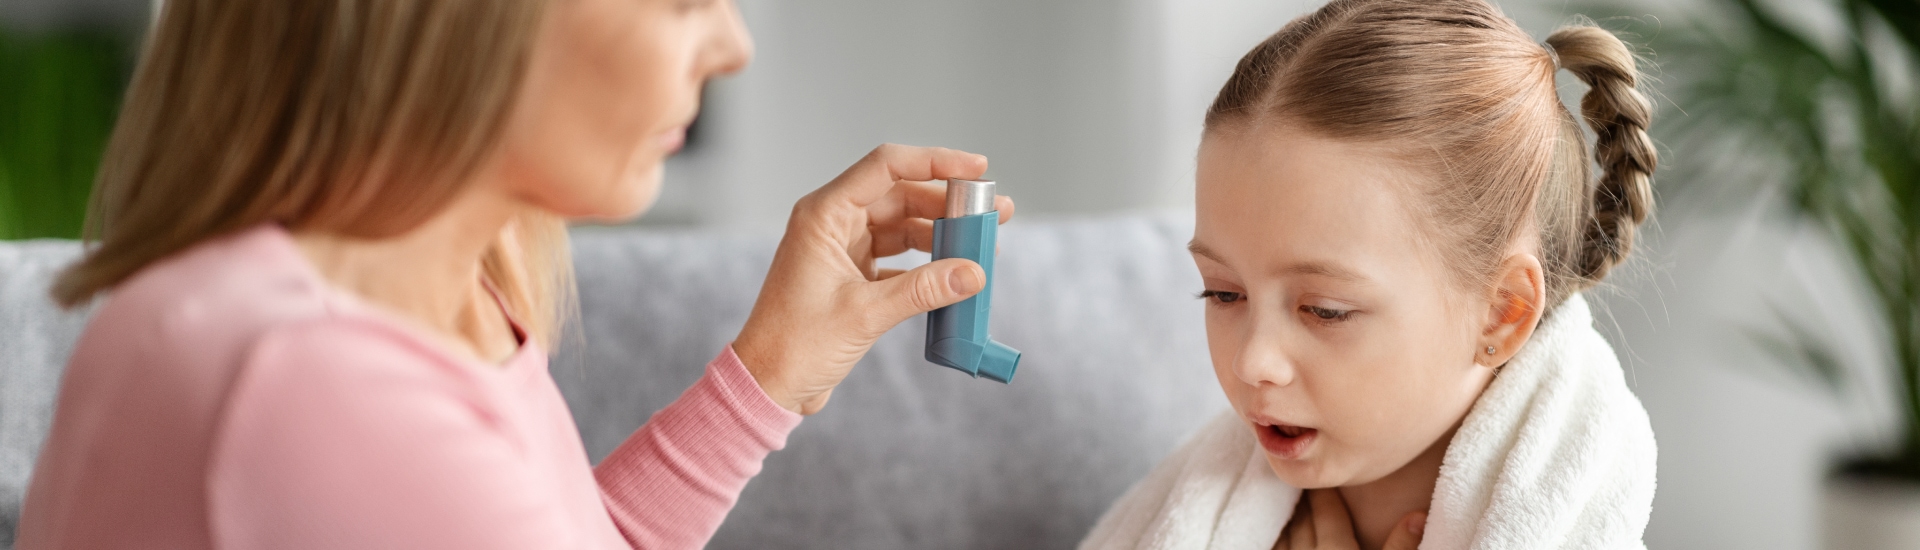 Caring mother giving asthma inhaler to sick child at home